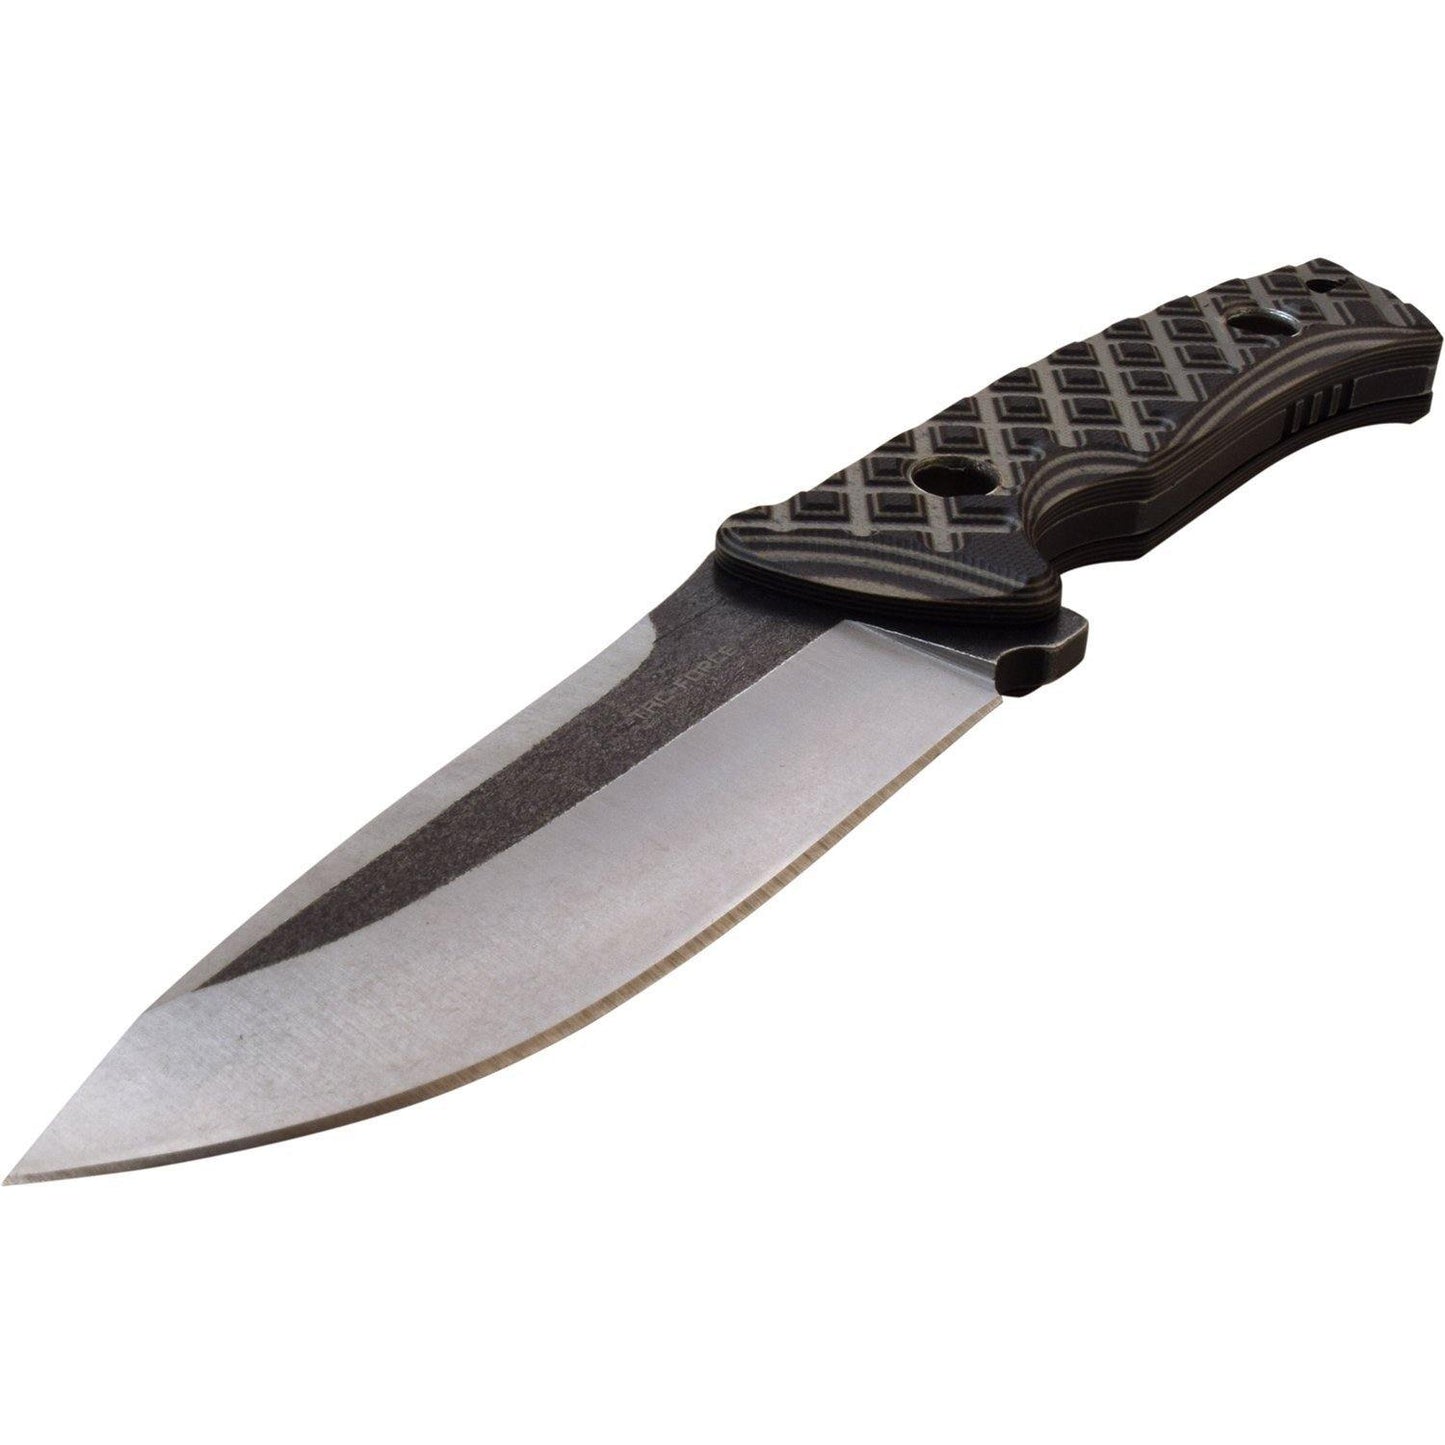 Tac-Force Drop Point Satin Fixed Blade Knife - 9 Inches Full Tang G10 Handle #tf-Fix008Tn - Xhunter New Zealand